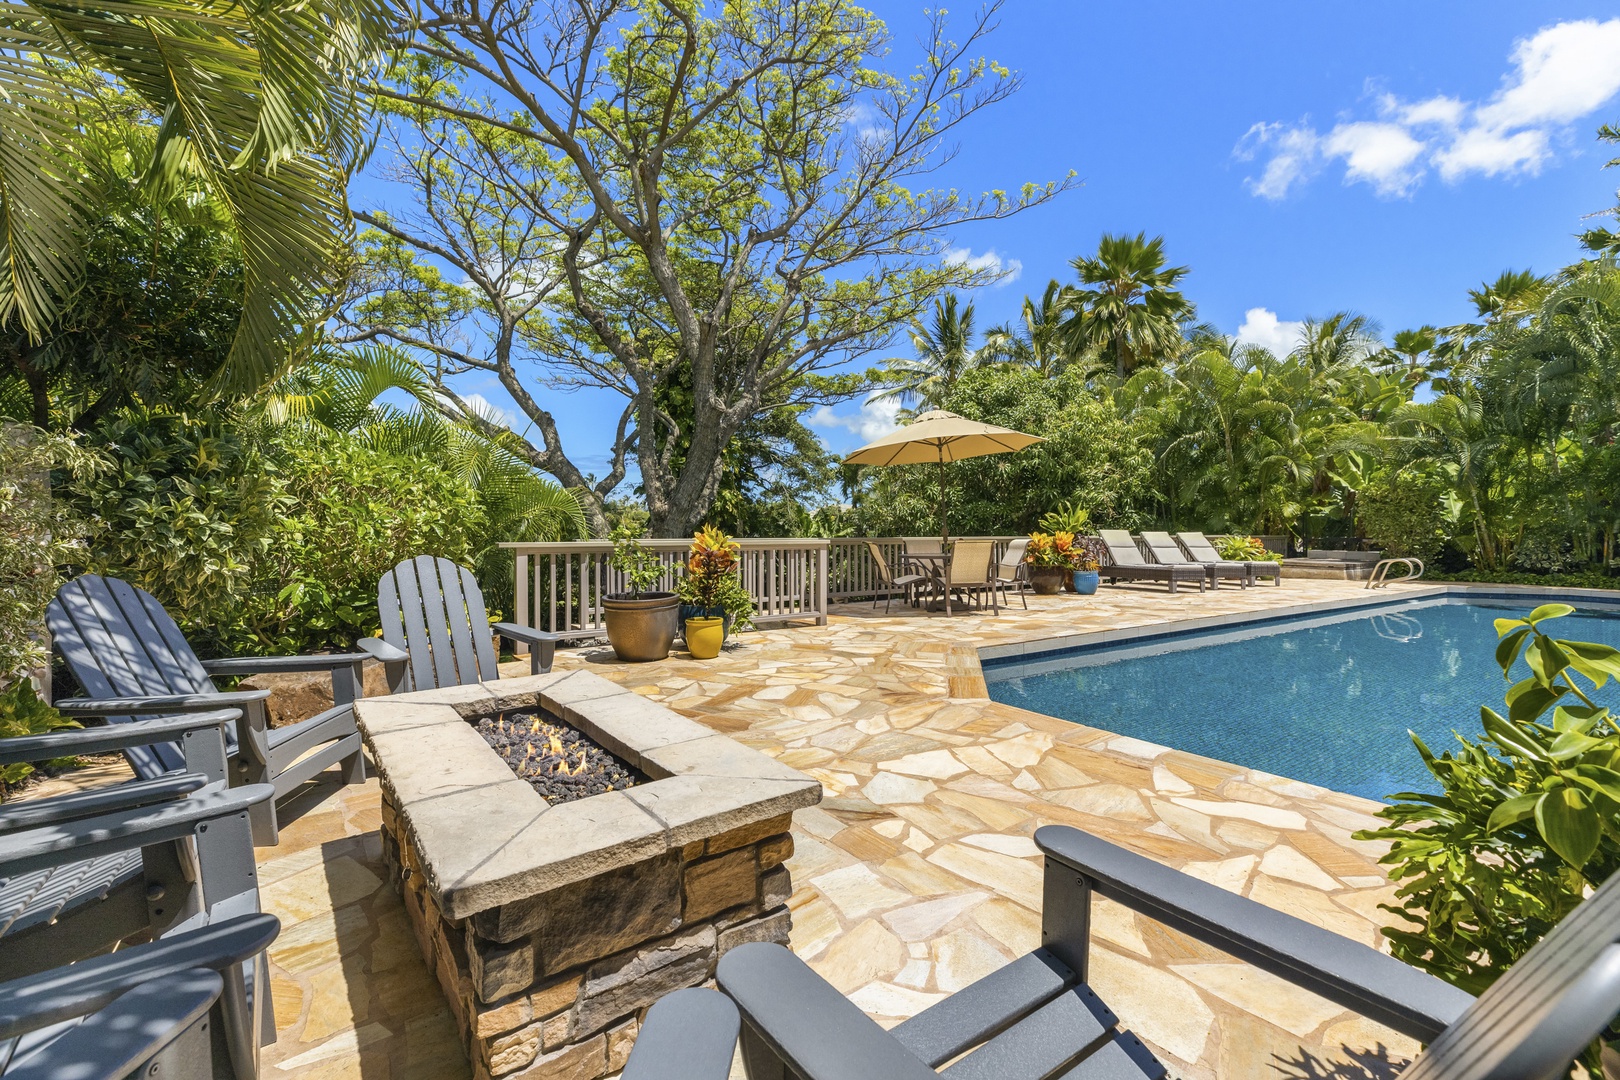 Honolulu Vacation Rentals, Hale Le'ahi* - Poolside fire pit where to gather with friends at night